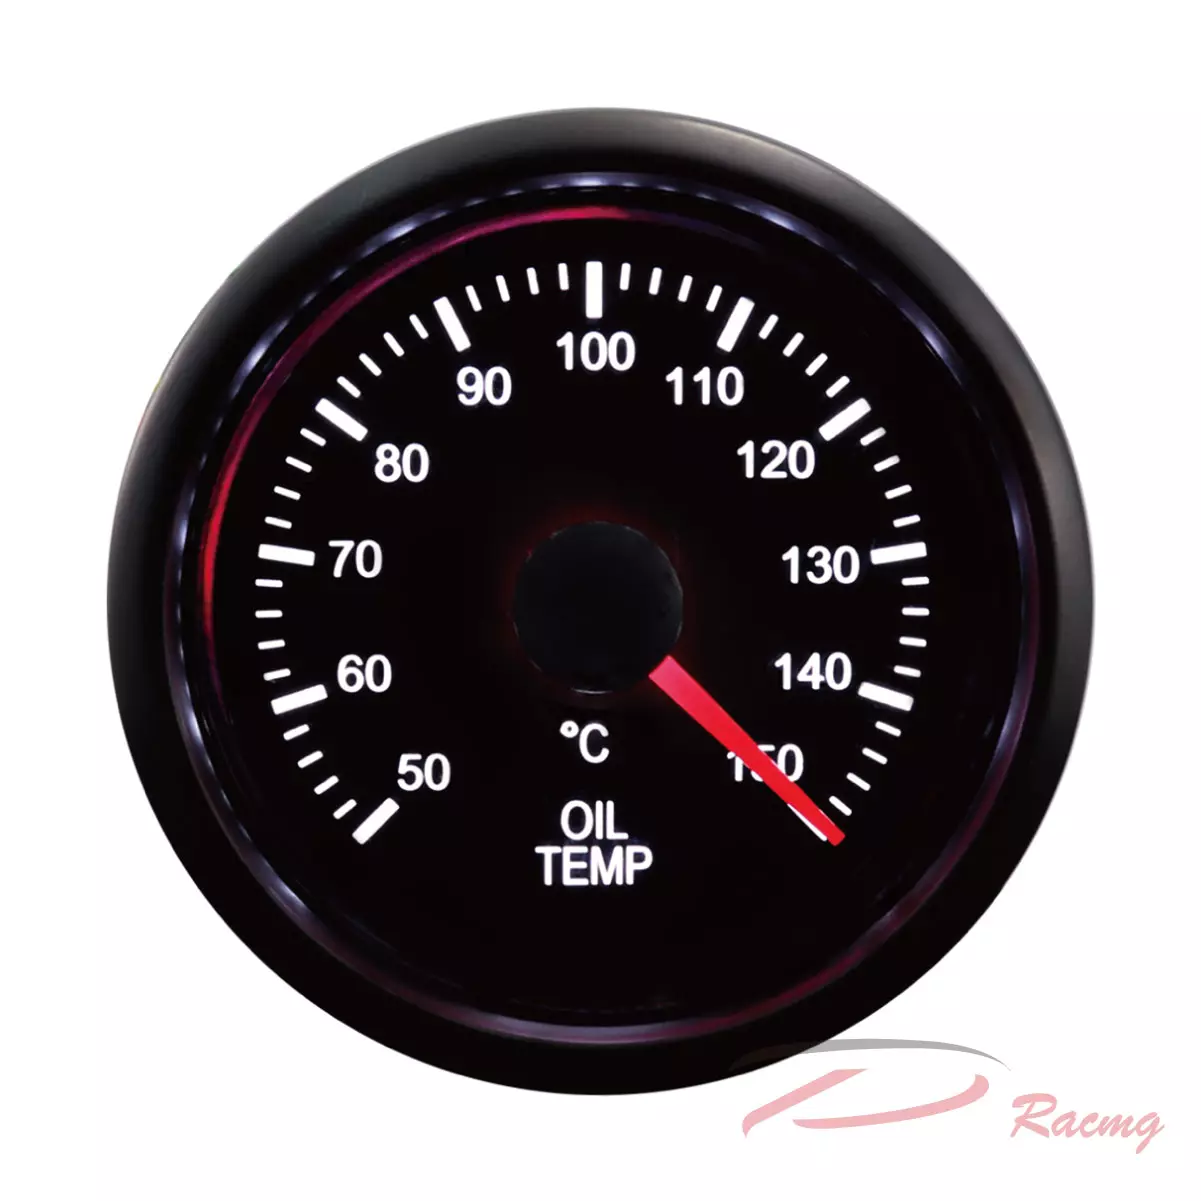 Dracing, Depo racing, AutoMeter, performance oil temperature gauges, oil temperature gauges, accurate oil temperature gauges, durable oil temperature gauges, professional oil temperature gauges, ultra-lite oil temperature gauges, sport-comp oil temperature gauges, cobalt oil temperature gauges, carbon fiber oil temperature gauges, car oil temperature gauges, truck oil temperature gauges, racing oil temperature gauges, suv oil temperature gauges, motorcycle oil temperature gauges, Fahrenheit oil temperature gauges, Celsius oil temperature gauges, 2-1/16" oil temperature gauges, 2-5/8" oil temperature gauges, mechanical oil temperature gauges, digital-stepper motor oil temperature gauges, air-core oil temperature gauges, analog oil temperature gauges, digital oil temperature gauges